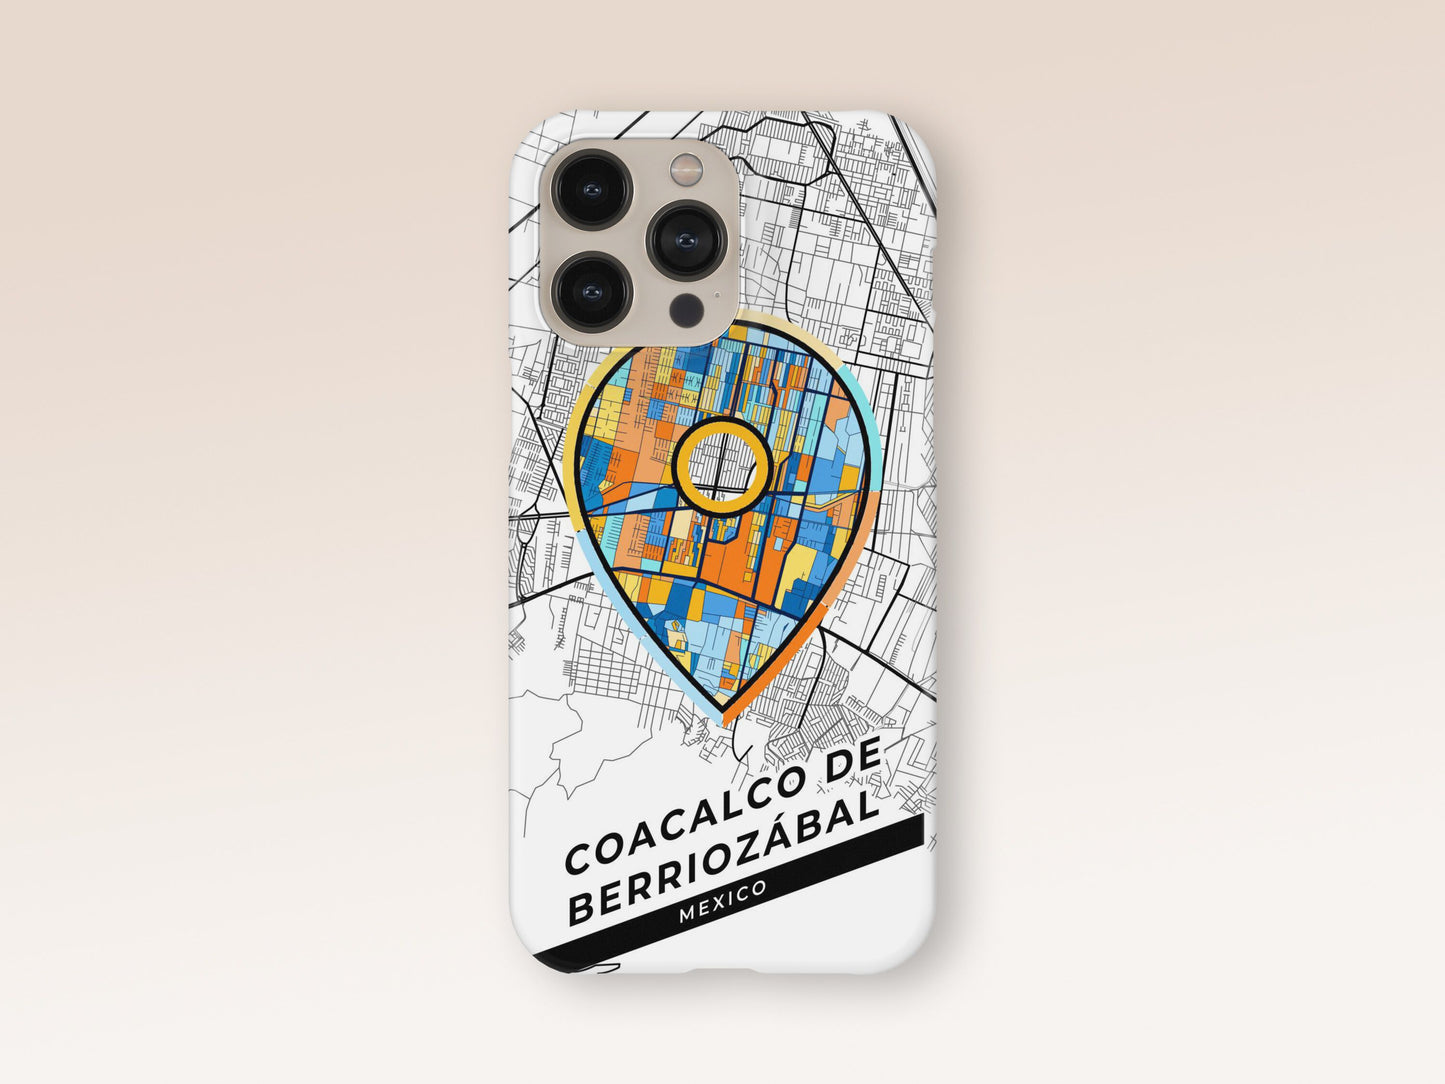 Coacalco De Berriozábal Mexico slim phone case with colorful icon. Birthday, wedding or housewarming gift. Couple match cases. 1